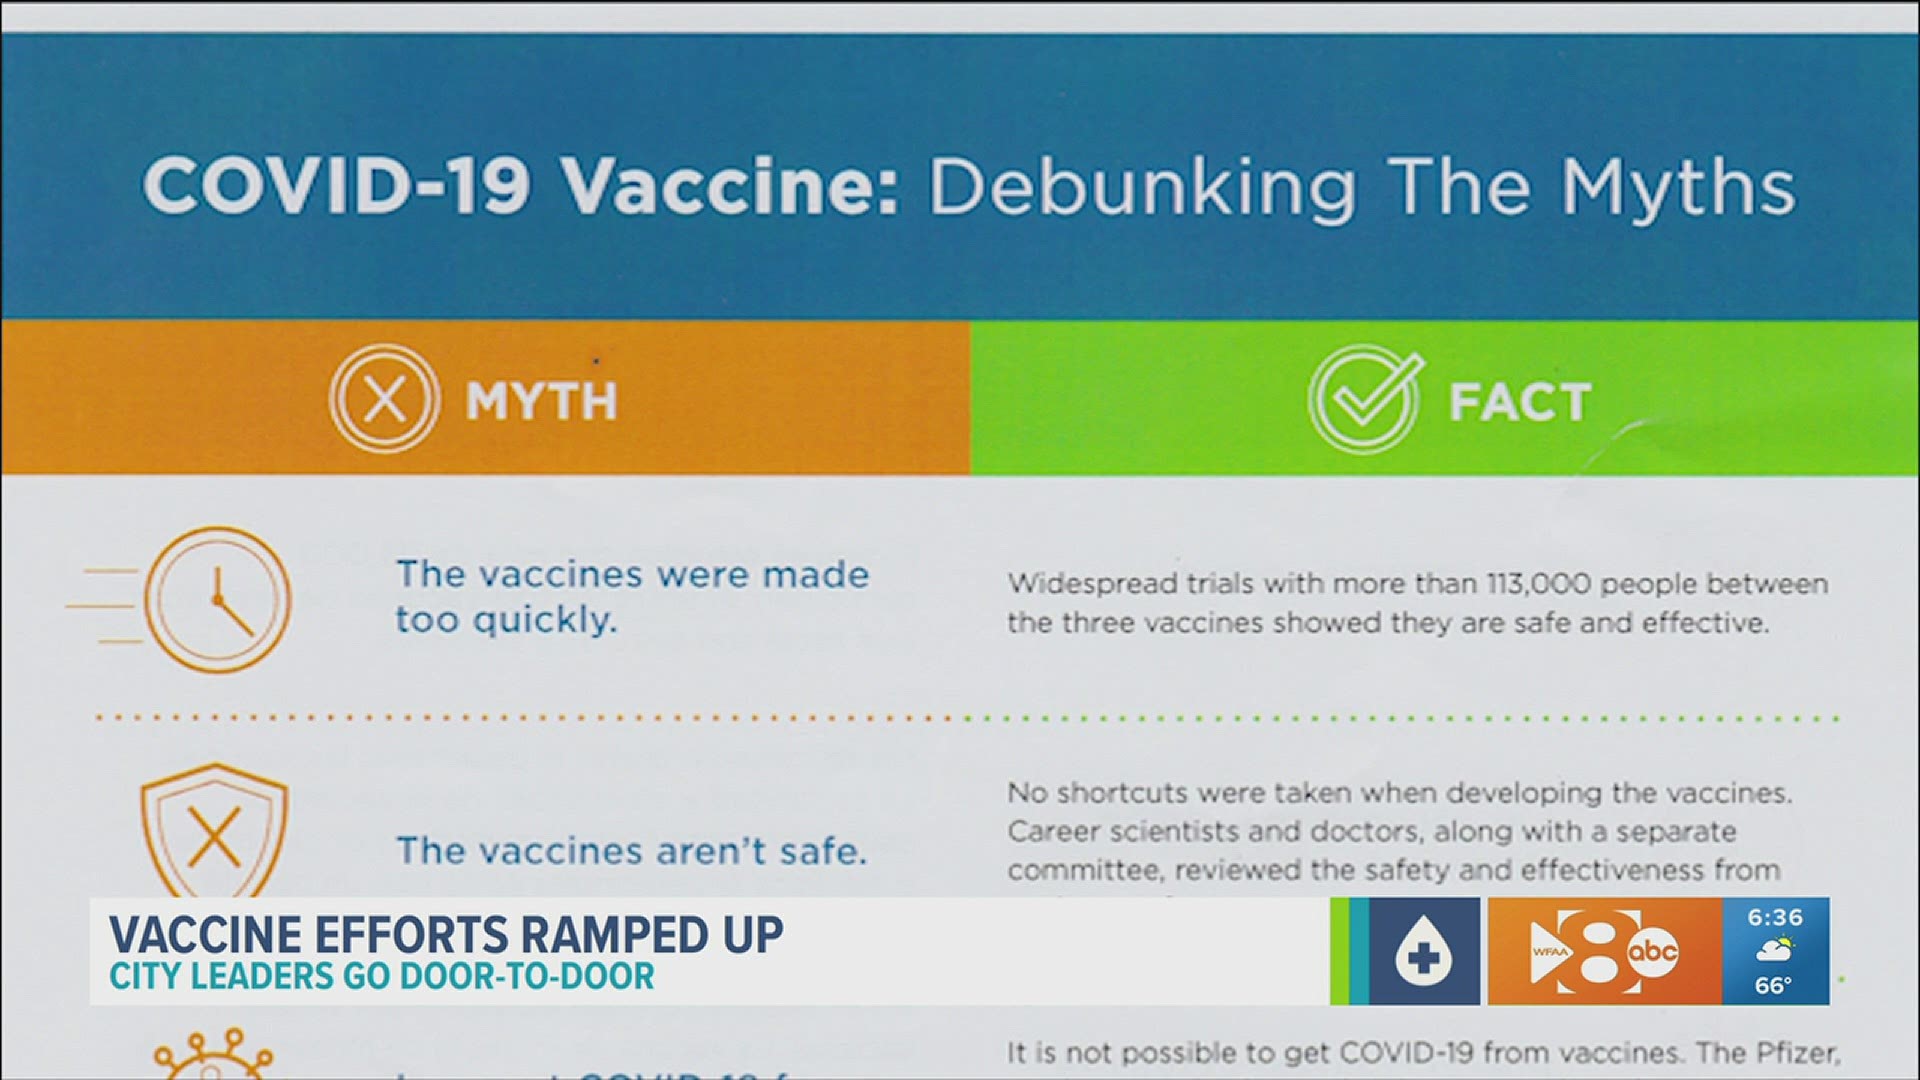 As COVID-19 cases and hospitalizations keep dropping, the effect of vaccines is obvious. But officials now need to get more people comfortable with getting the shot.